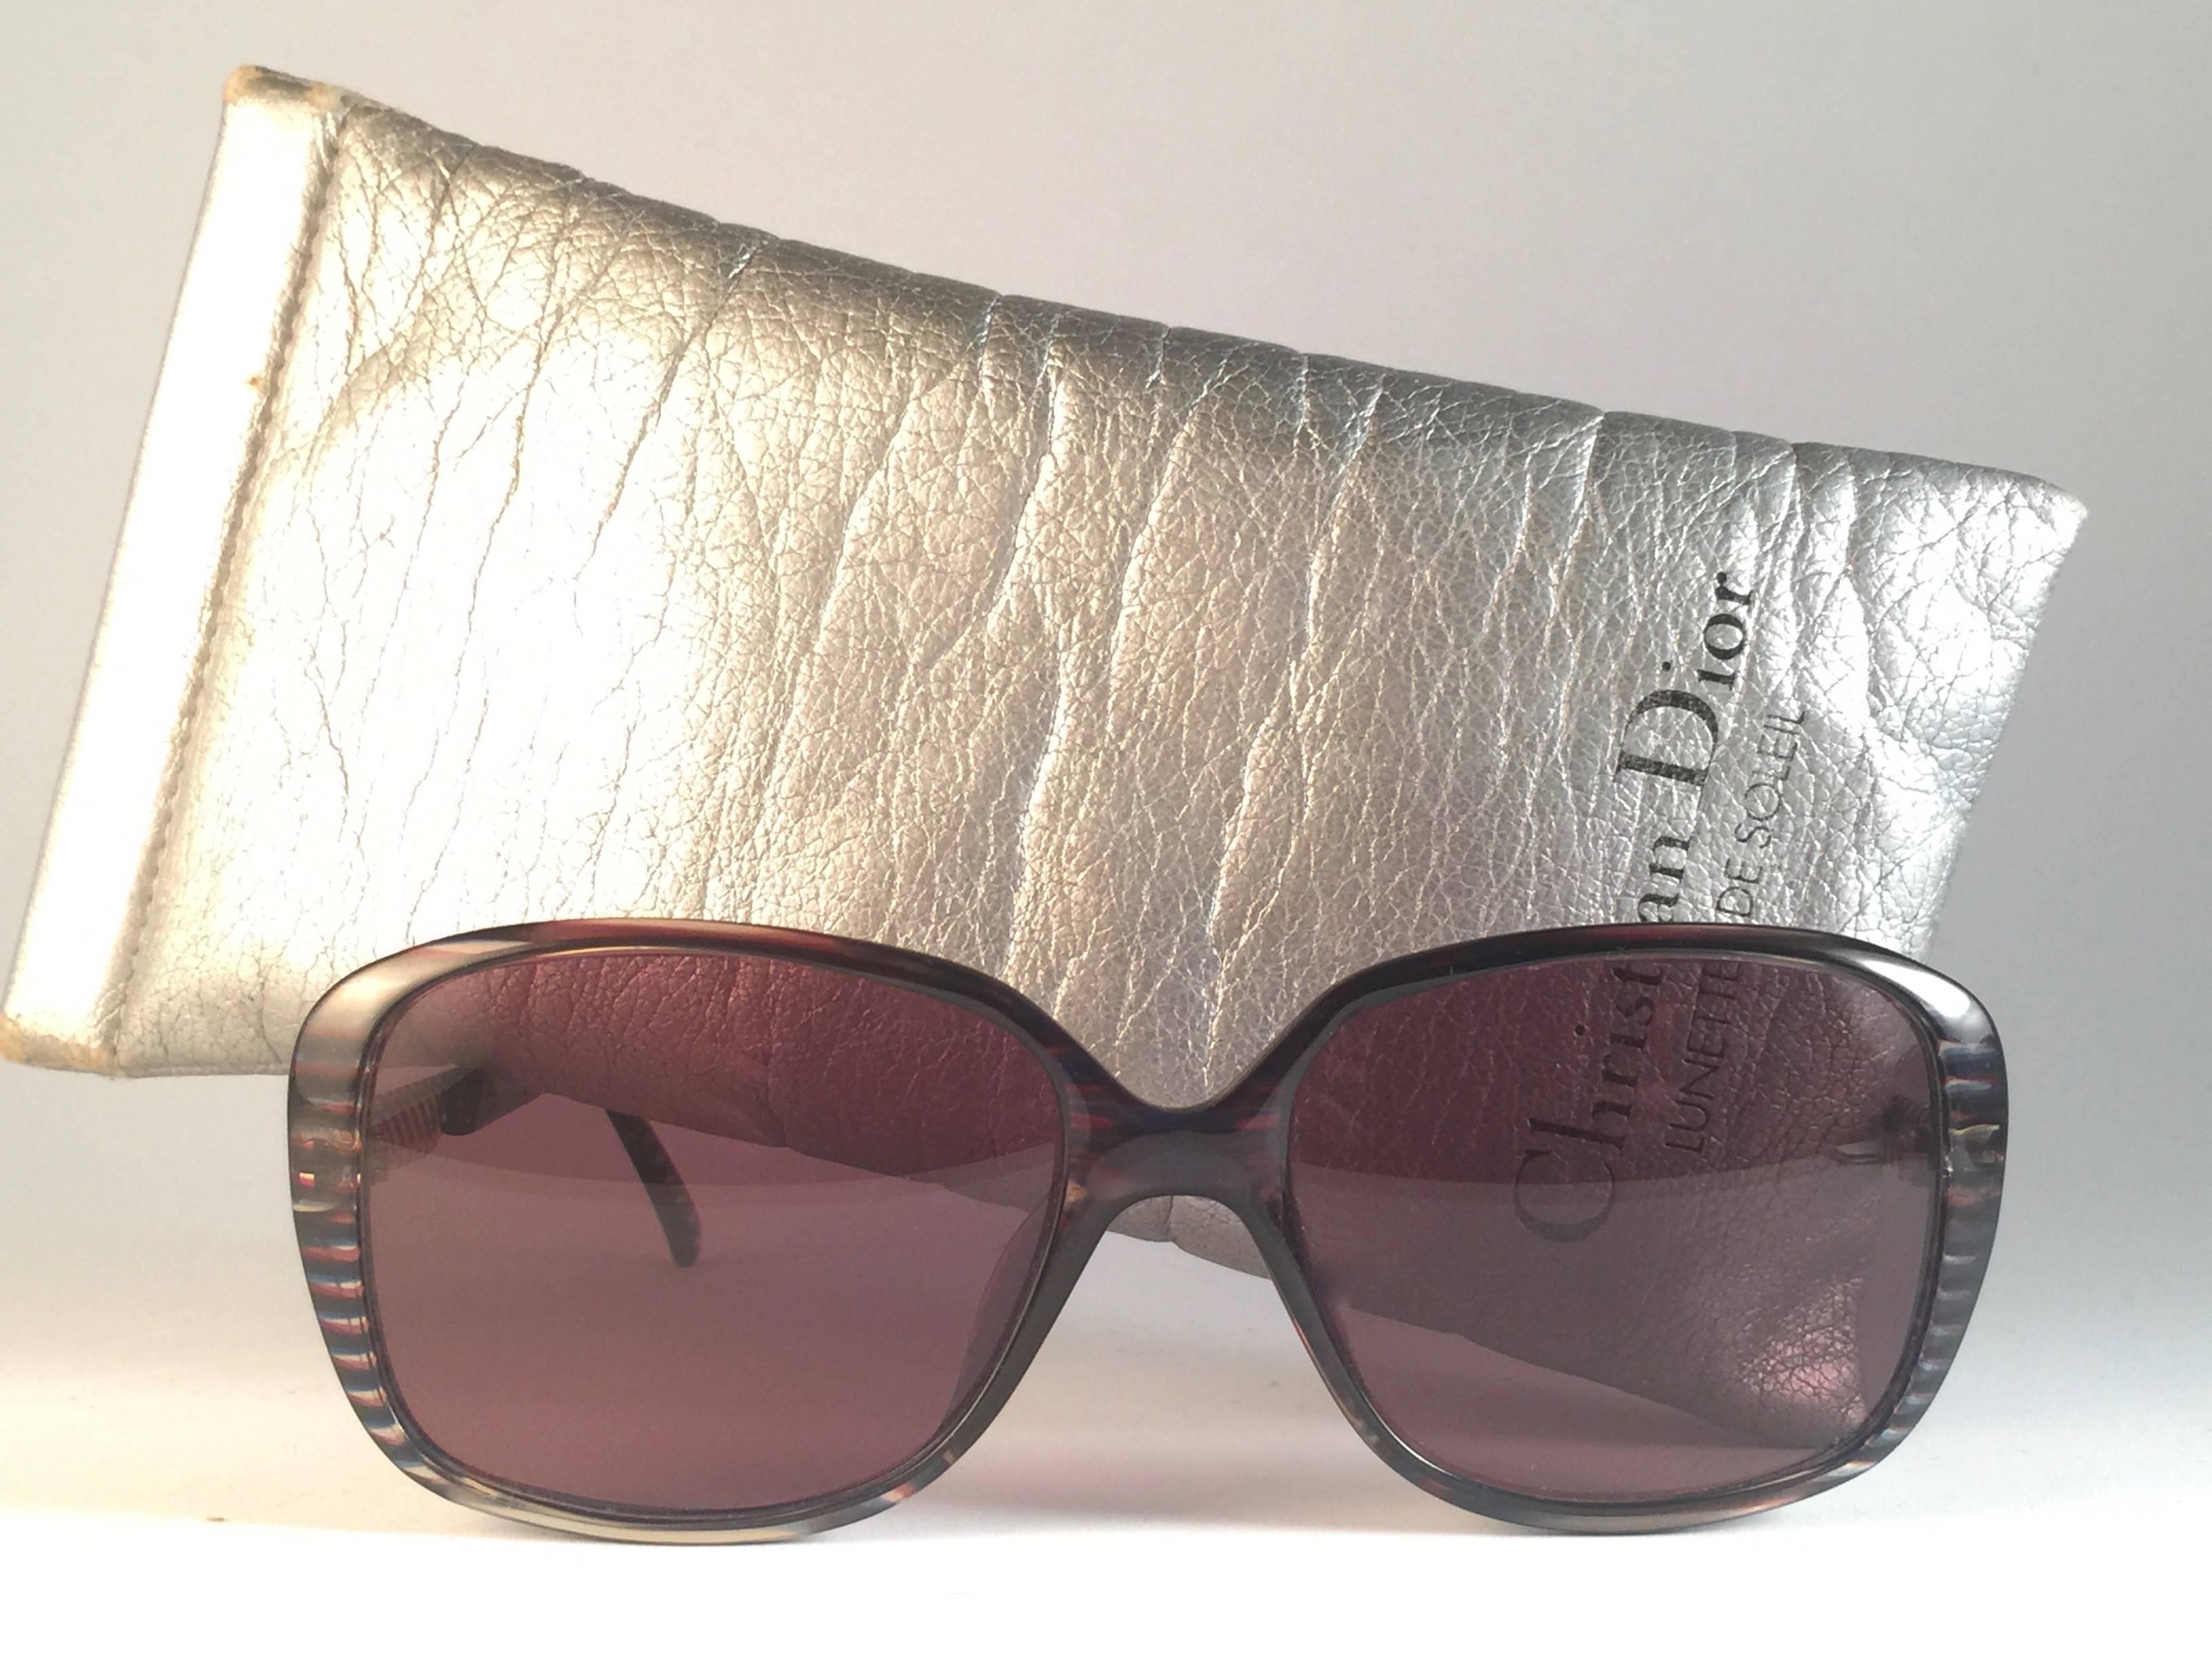 New vintage Christian Dior sunglasses. 

Dark grey lenses.

Comes with it original CD sleeve.

New, never worn or displayed this item may show light sign of wear due to storage.

Made in Austria

FRONT : 14.5 CMS

LENS HEIGHT : 4.5 CMS

LENS WIDTH :